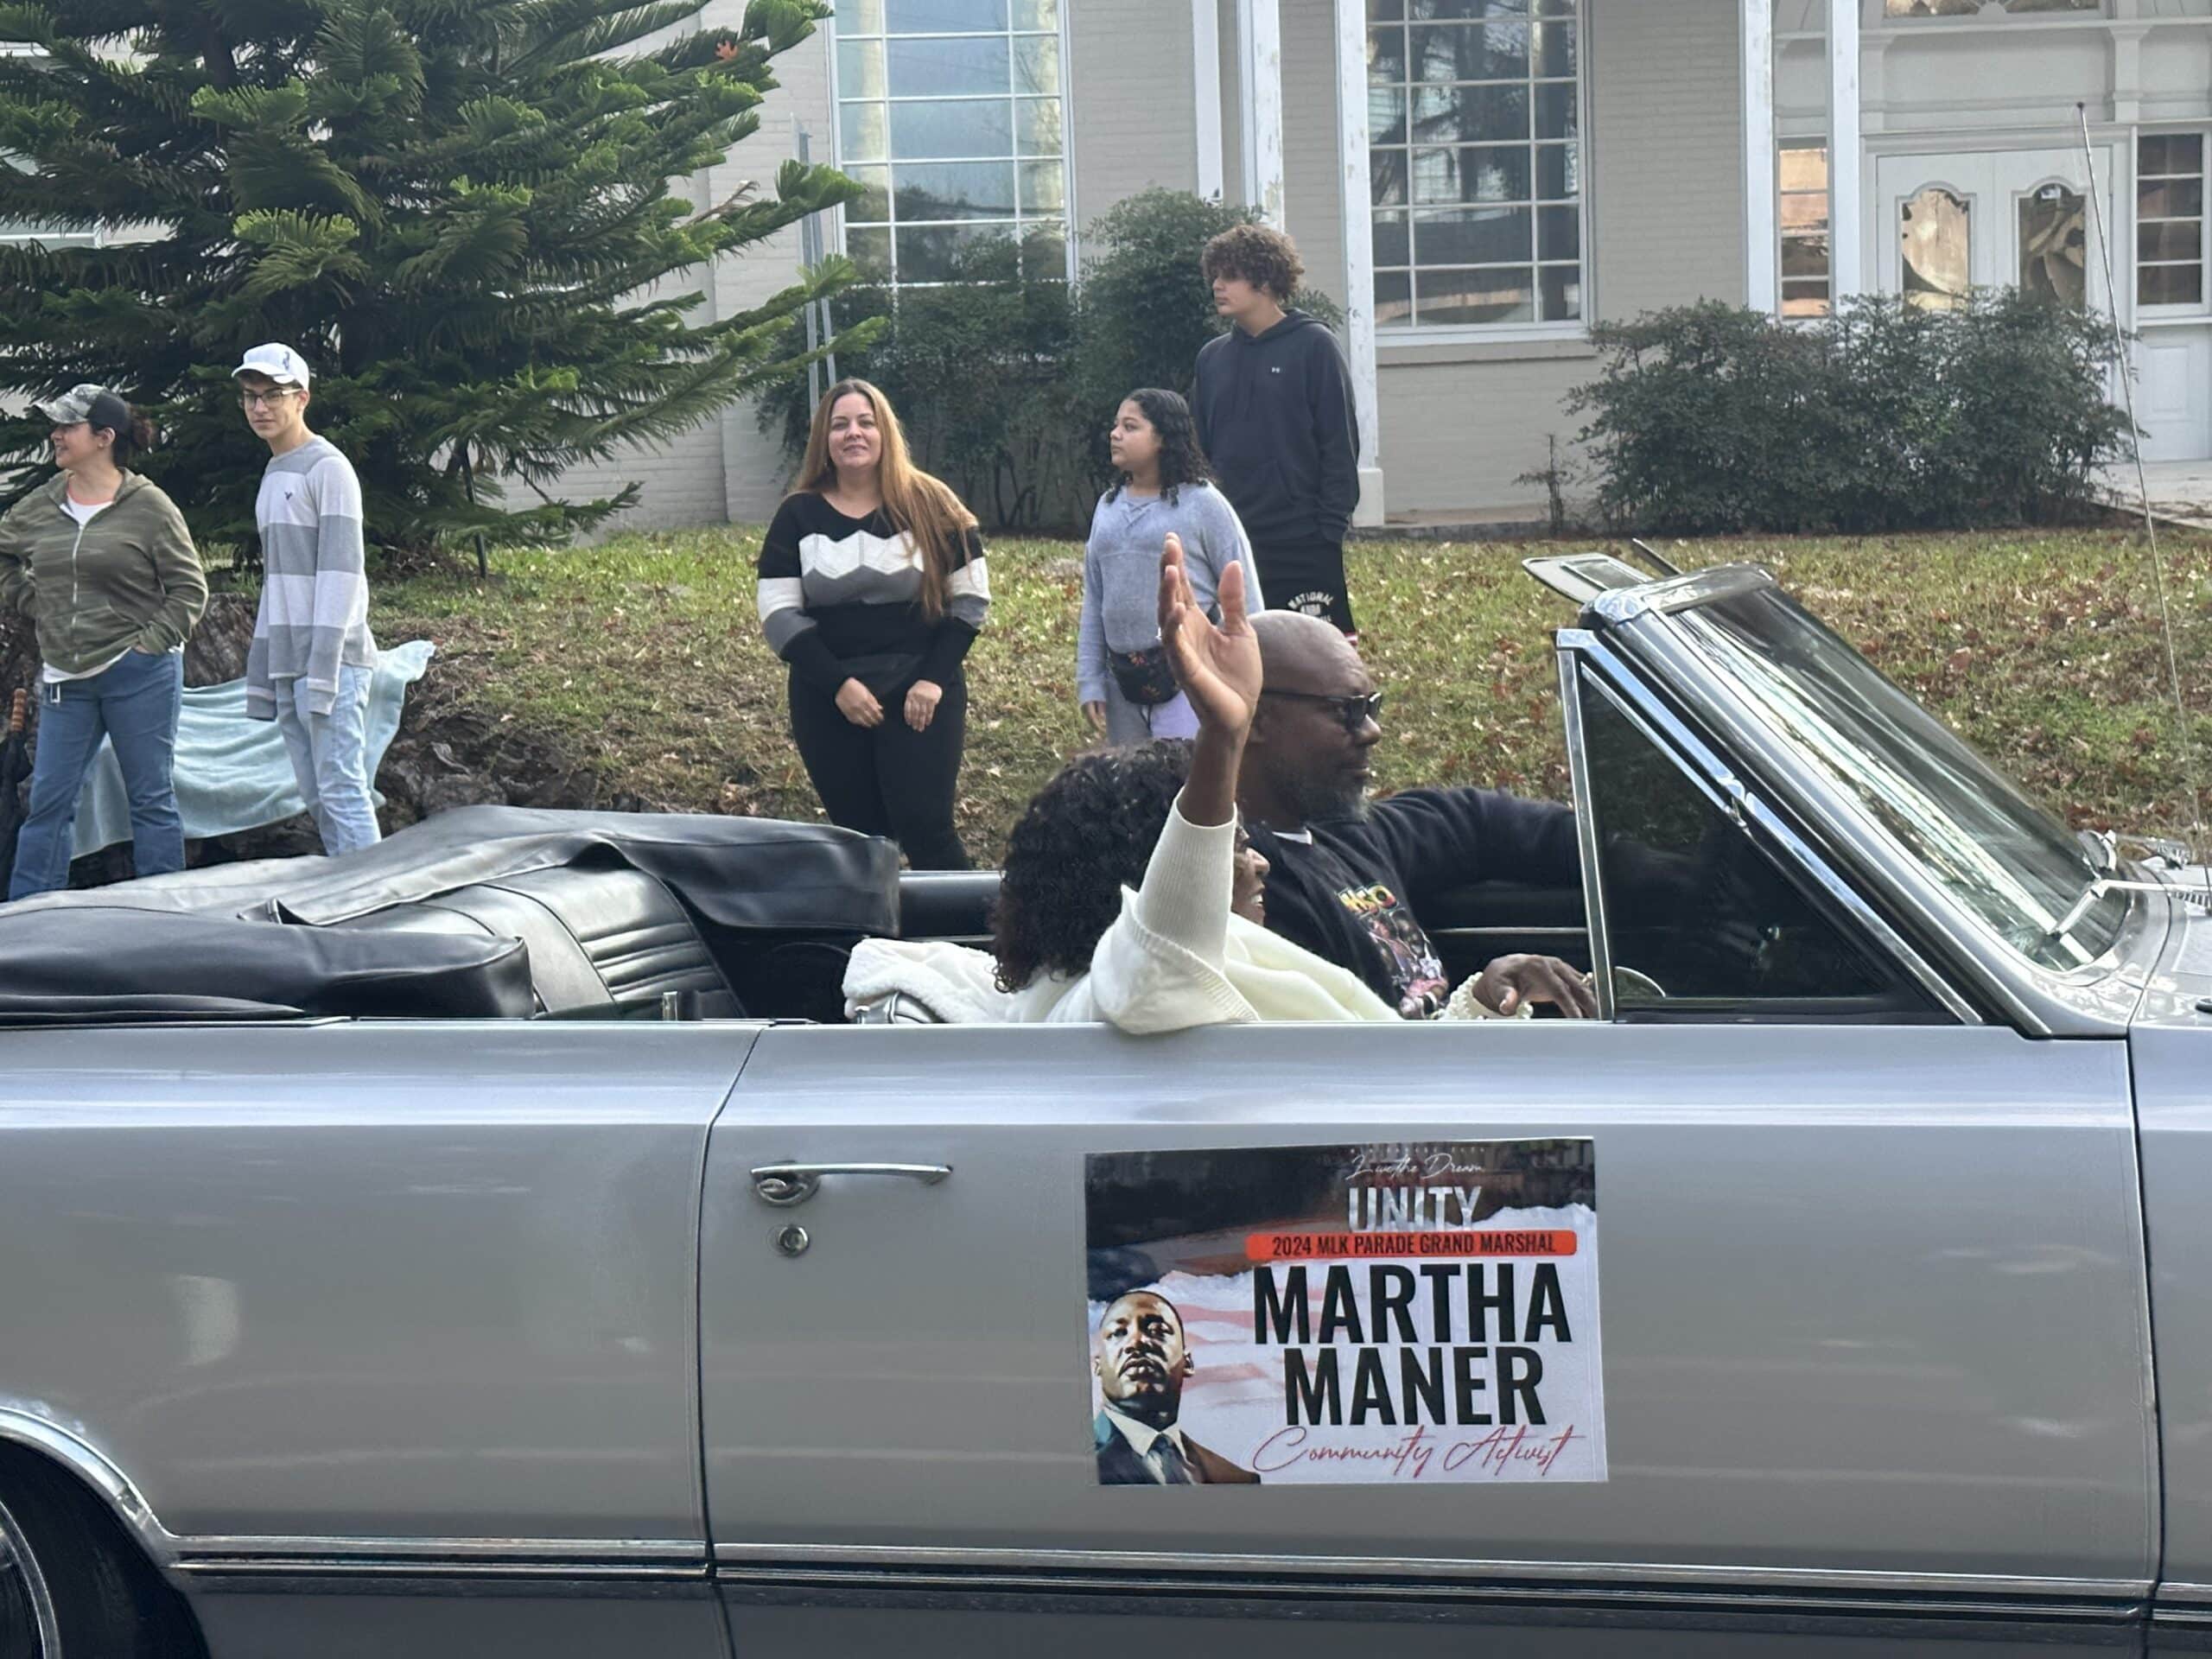 Grand Marshal Martha Maner at the Dr. Martin Luther King Jr. Day Parade. [Photo by Summer Hampton]